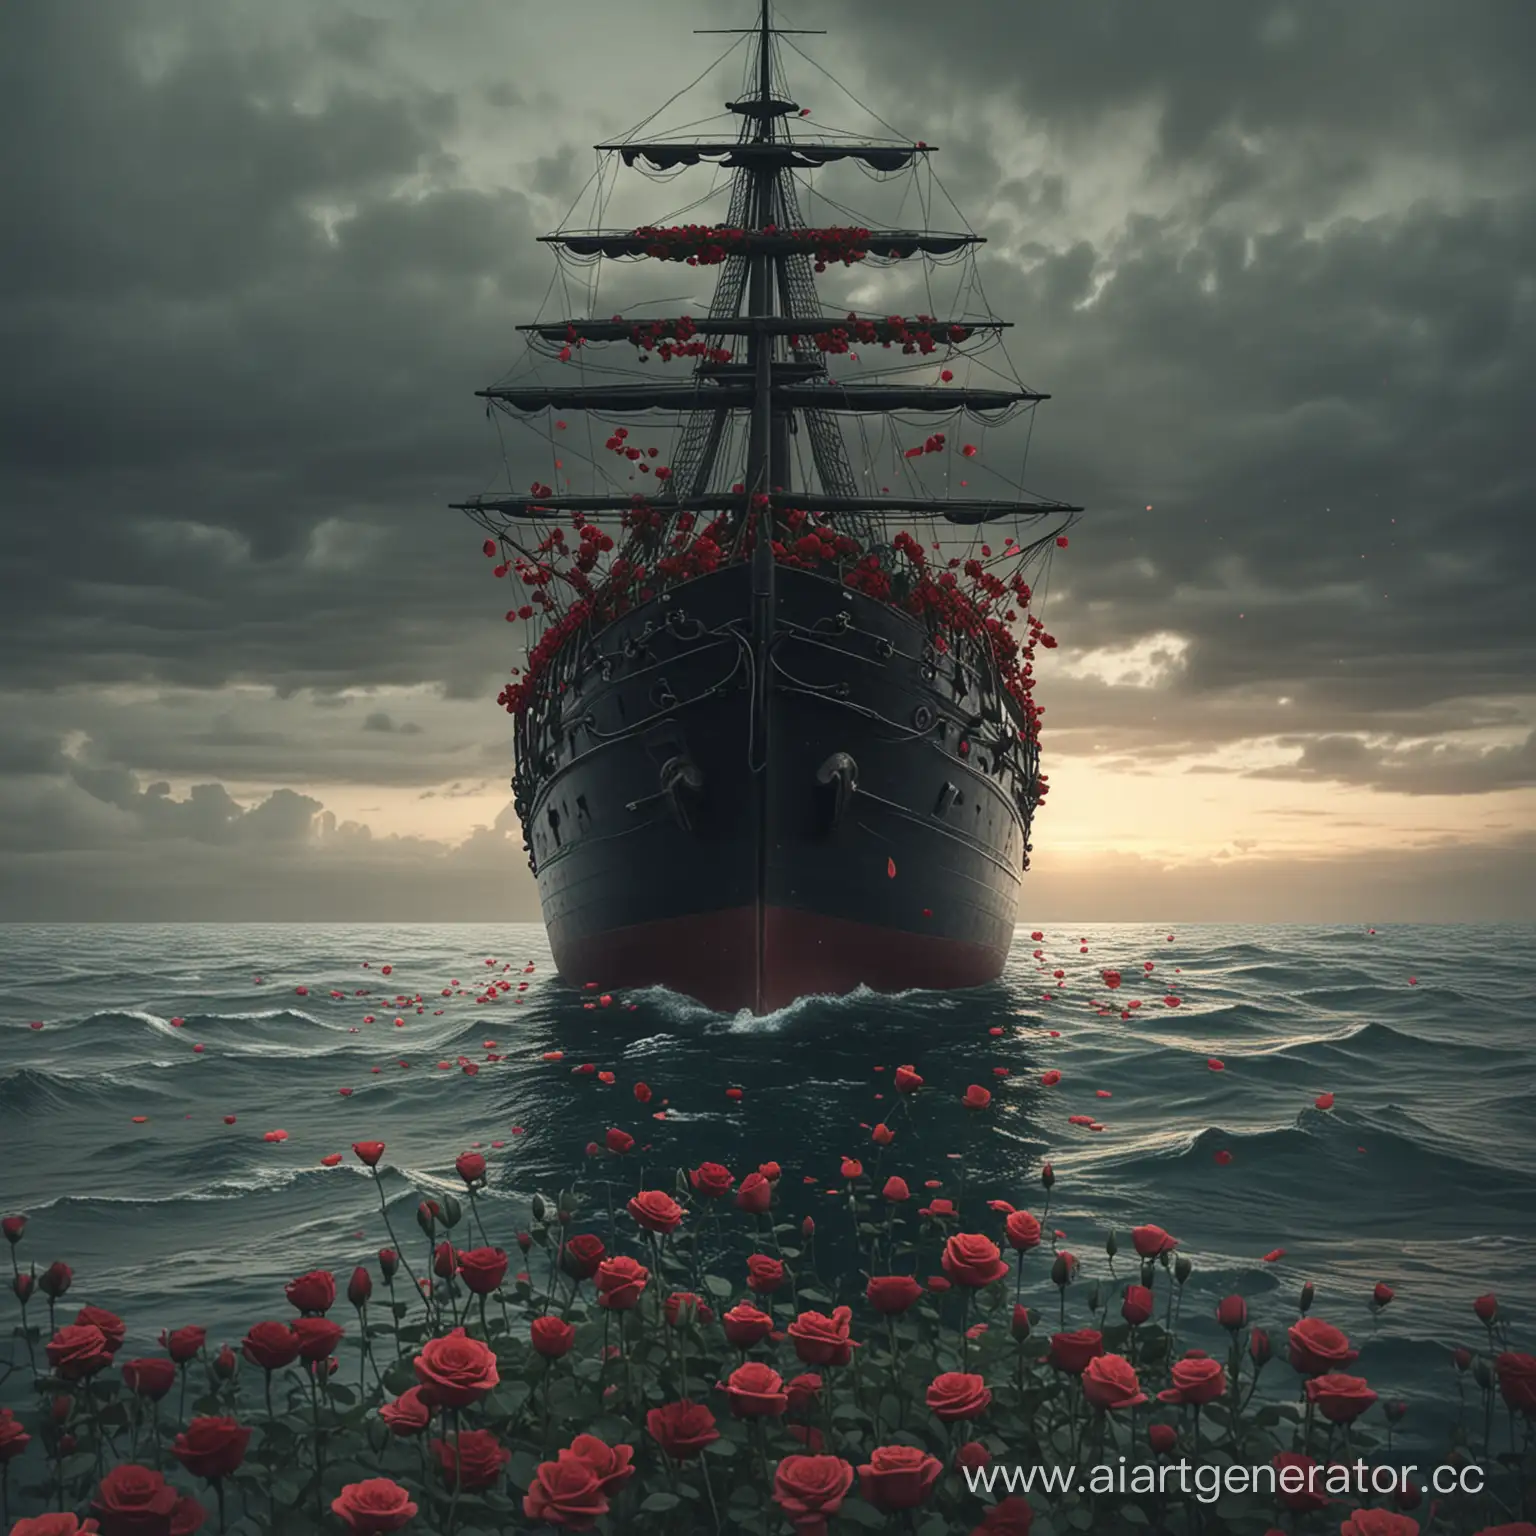 nmixx song run for roses: ship without people in the sea with a lot of roses